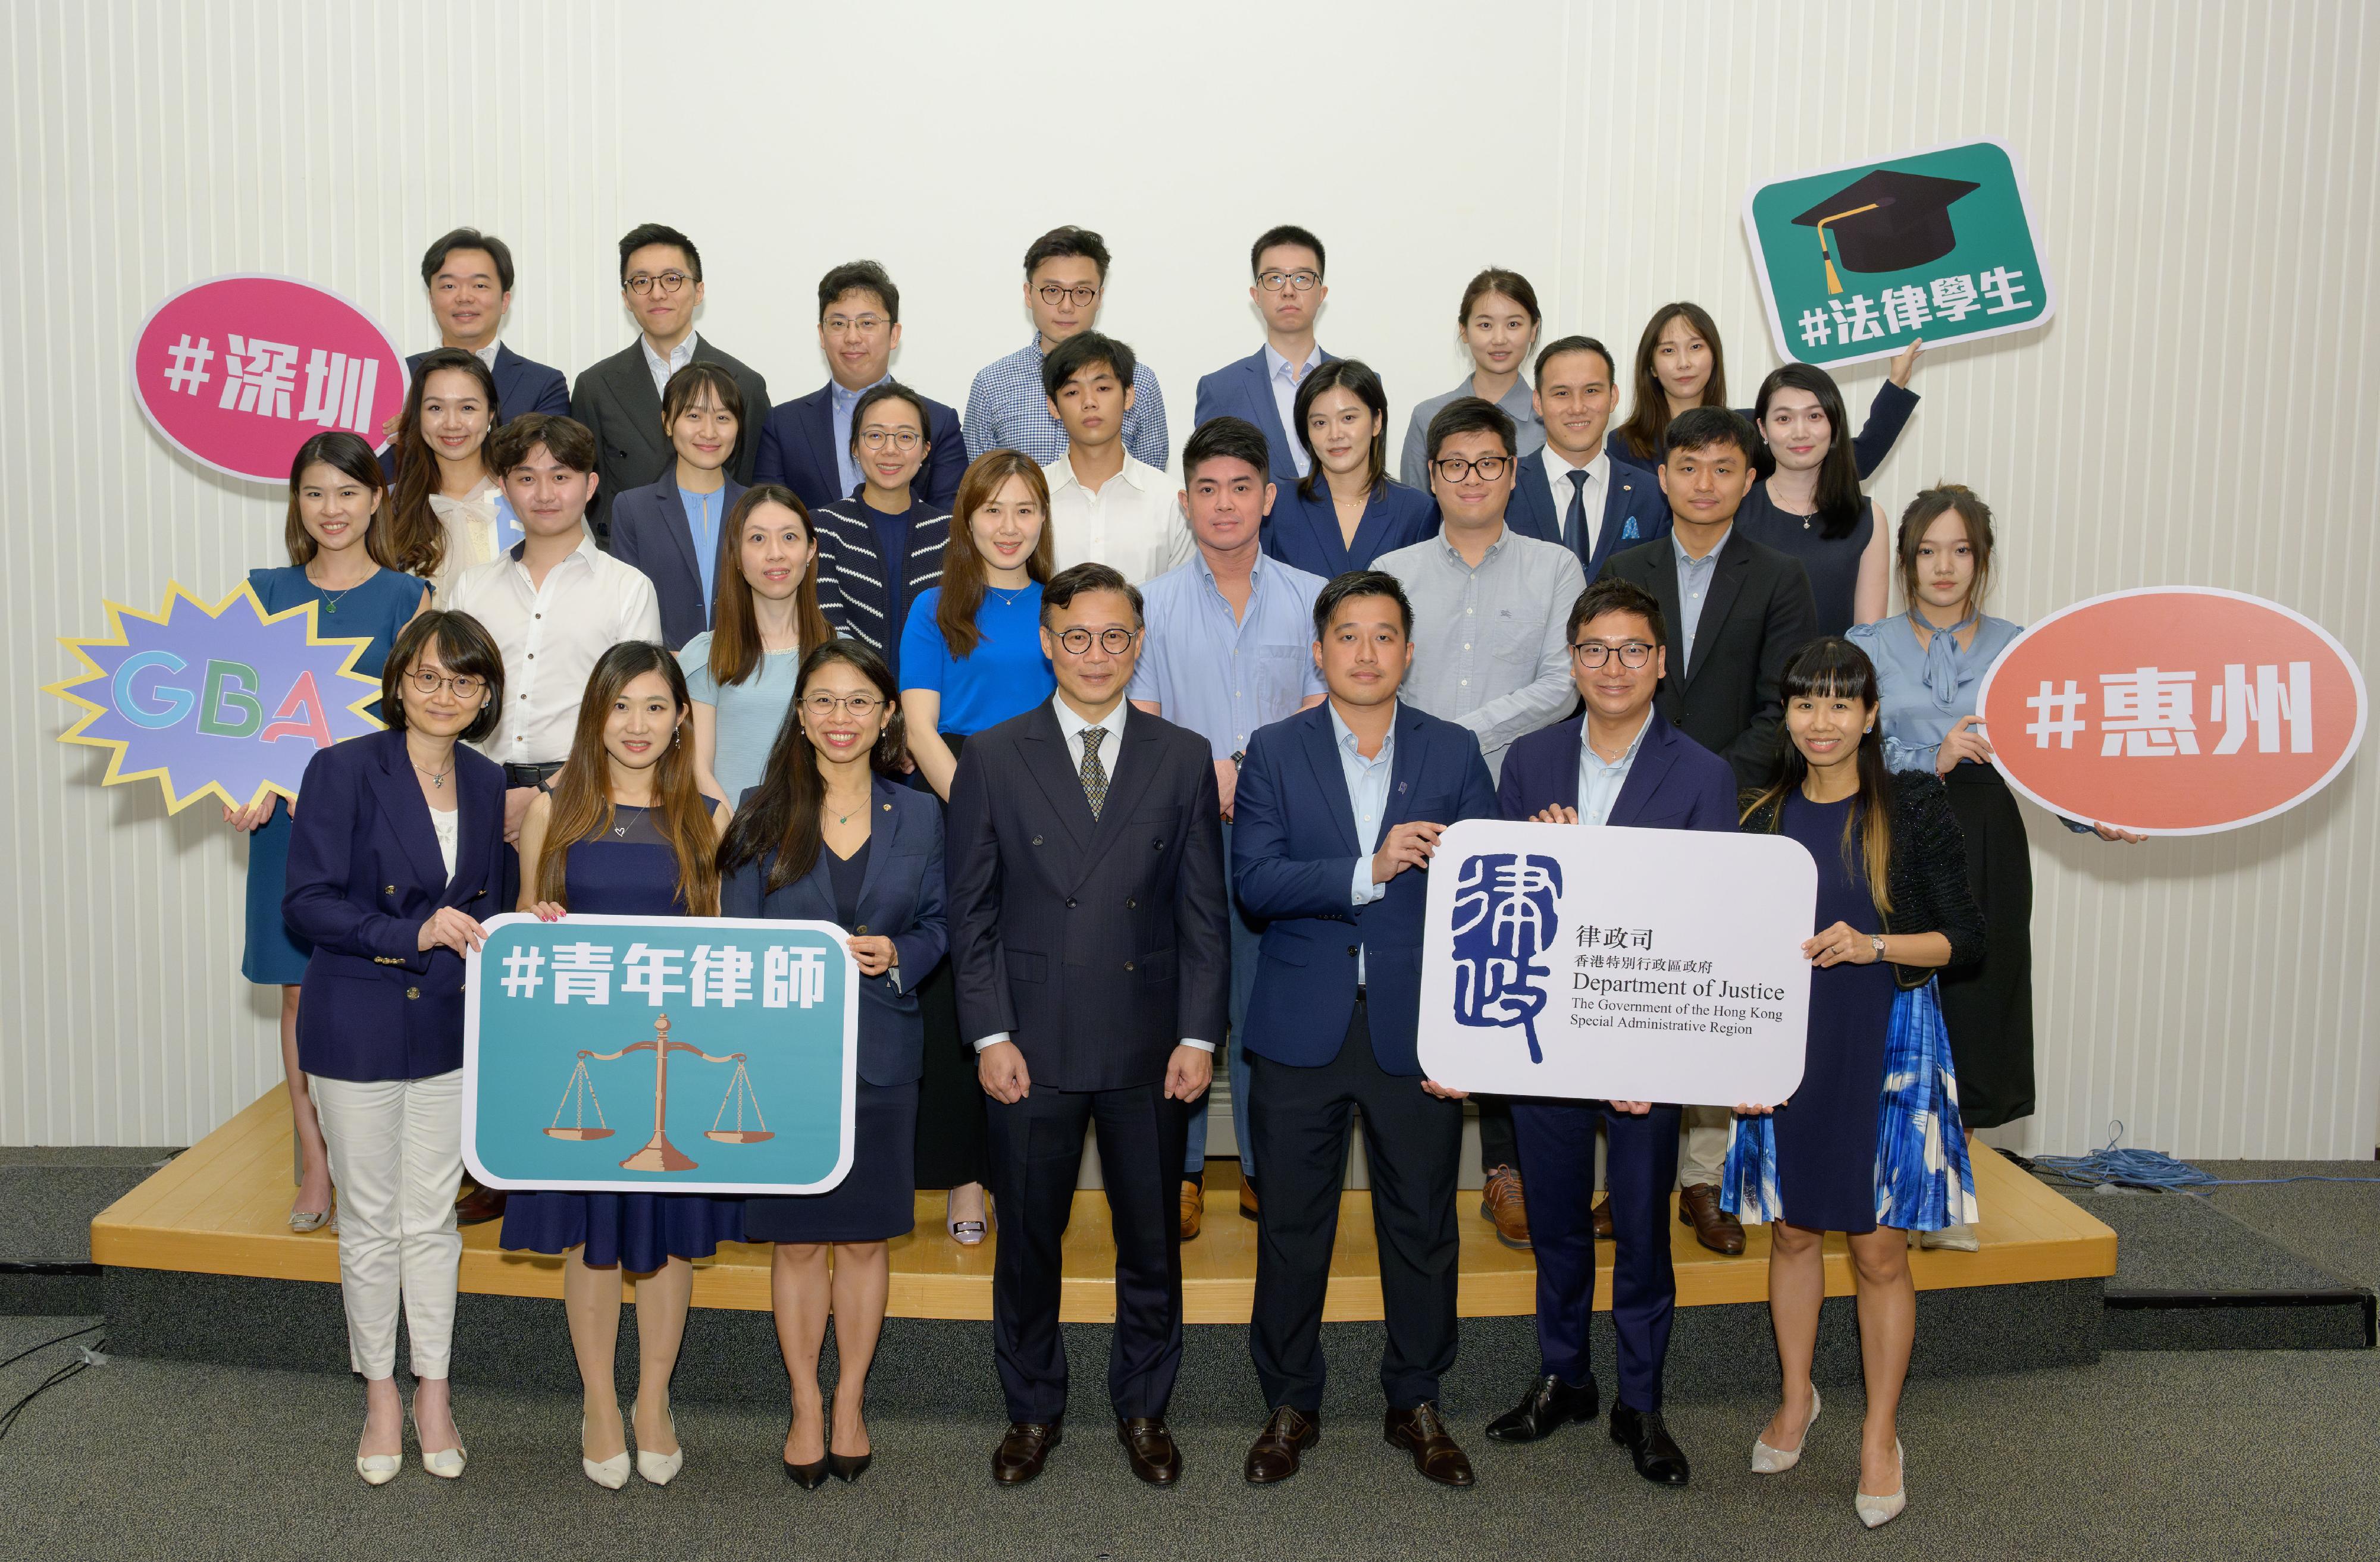 The Deputy Secretary for Justice, Mr Cheung Kwok-kwan, will lead a delegation comprising young representatives of the Law Society of Hong Kong and the Hong Kong Bar Association, young government counsel of the Department of Justice, and law students from the three law schools tomorrow (September 7) on a visit to Huizhou and Shenzhen. Photo shows Mr Cheung (first row, centre) and members of the delegation at the pre-trip briefing.